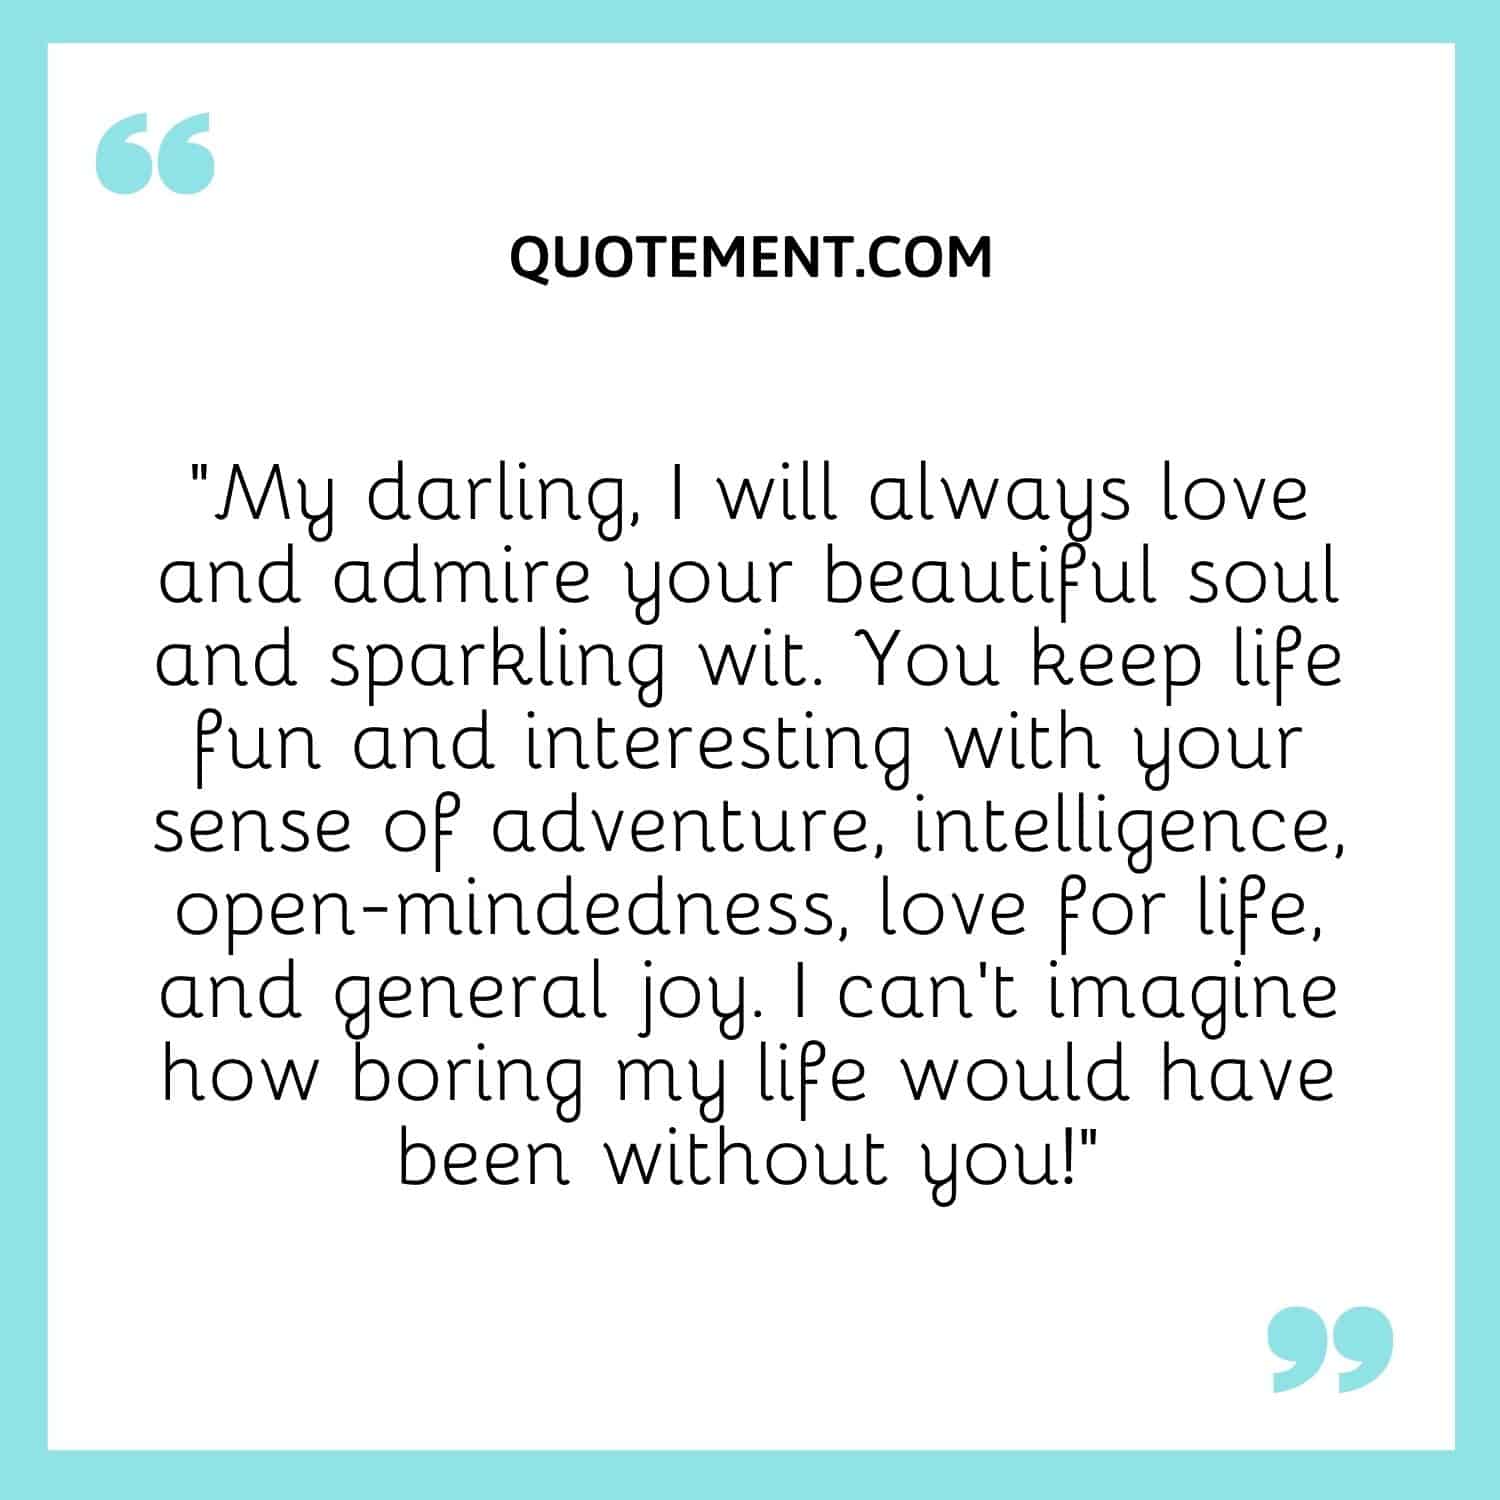 “My darling, I will always love and admire your beautiful soul and sparkling wit. You keep life fun and interesting with your sense of adventure, intelligence, open-mindedness, love for life, and general joy.